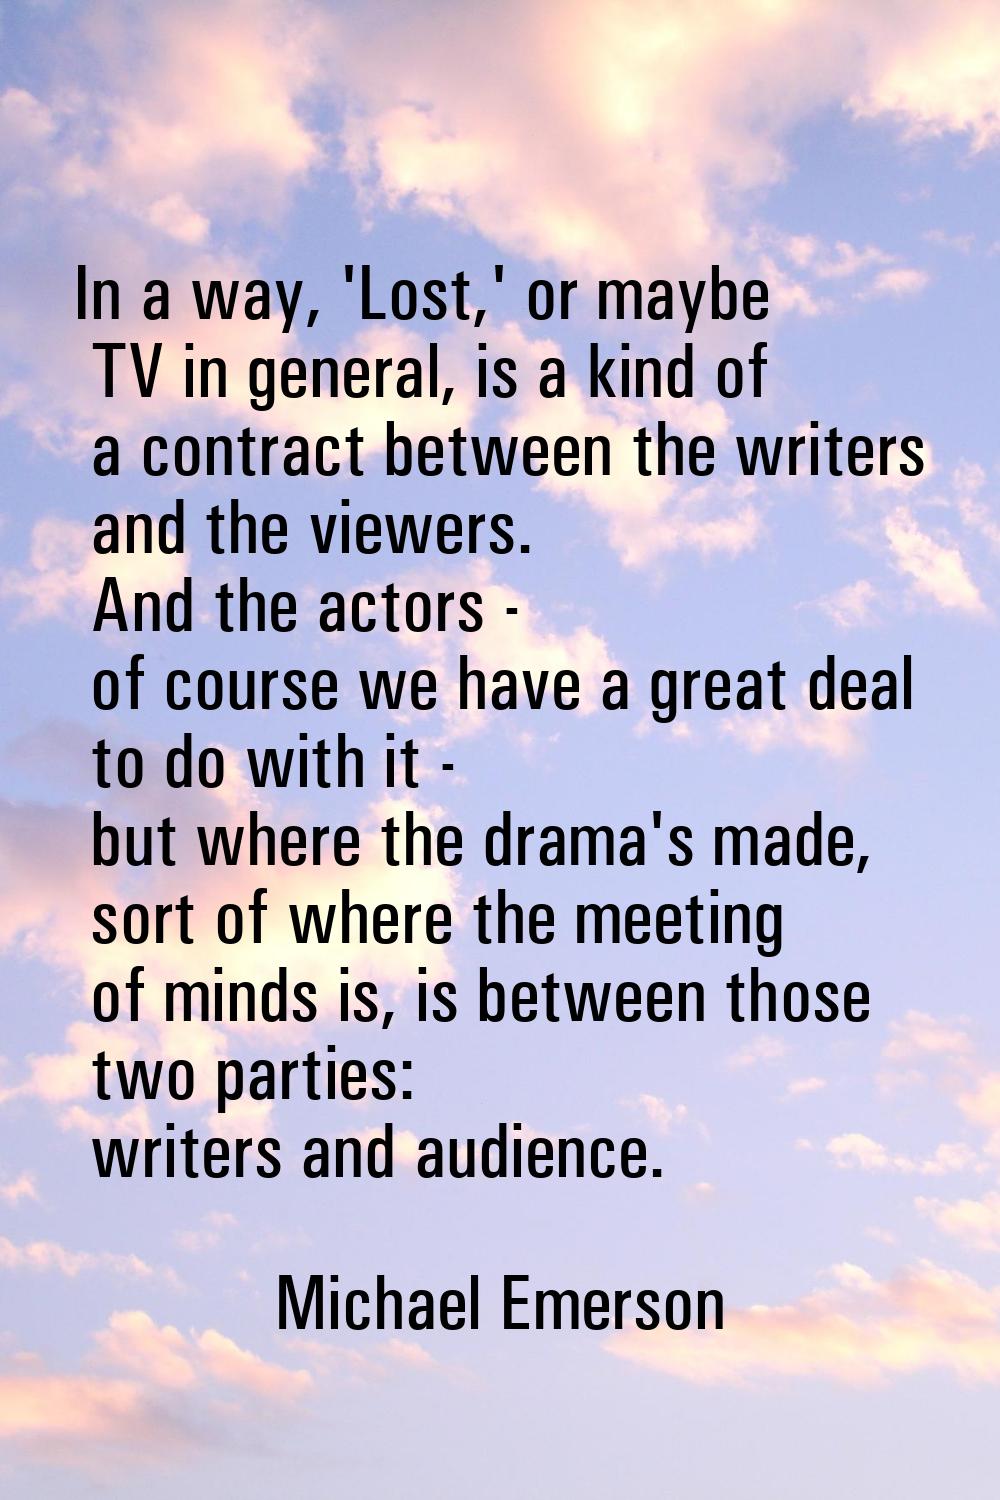 In a way, 'Lost,' or maybe TV in general, is a kind of a contract between the writers and the viewe